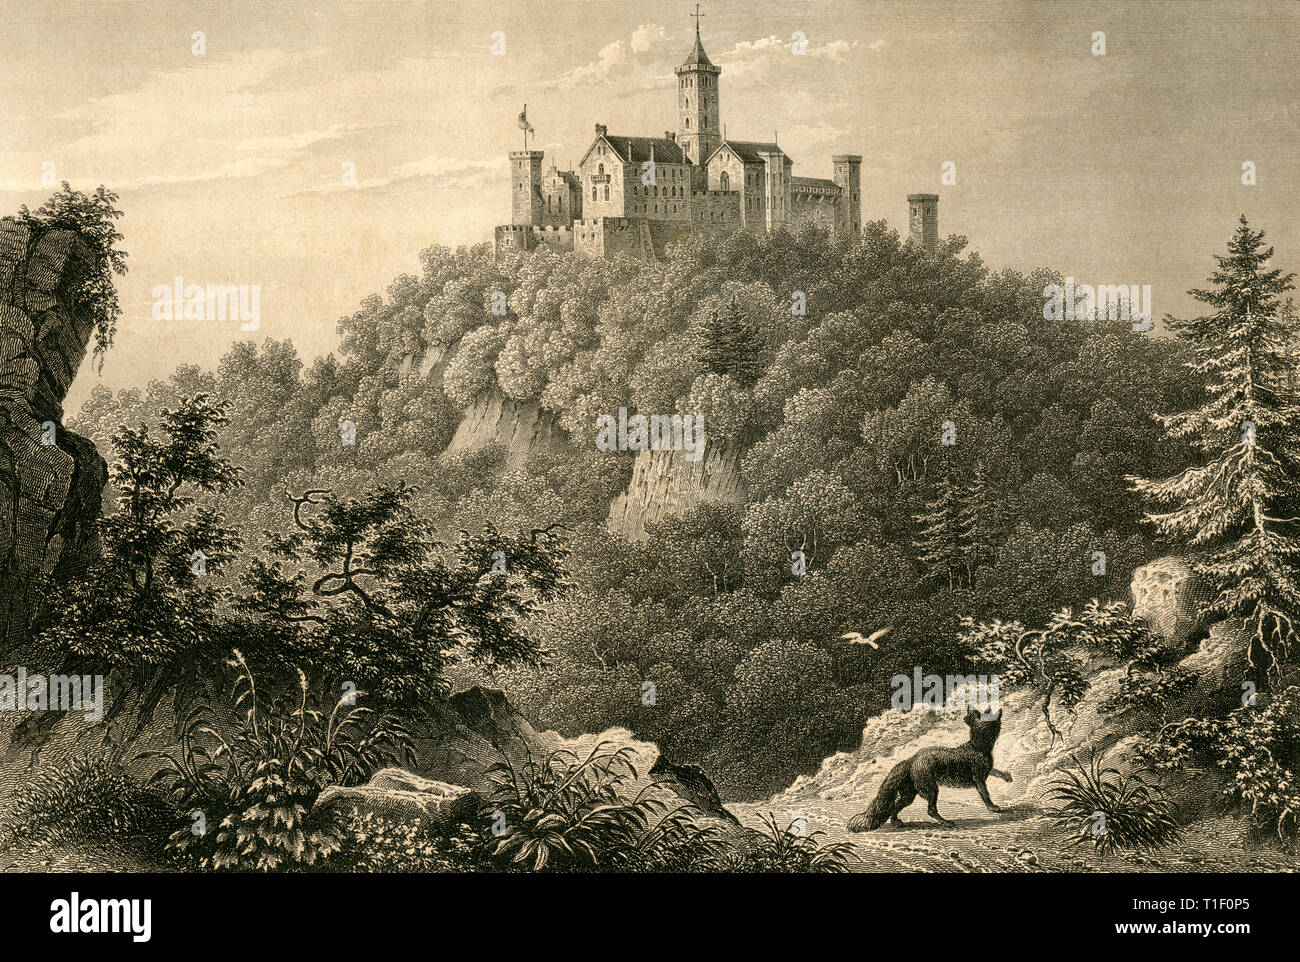 Germany, Thuringia, Wartburg, steel engraving from: 'Meyer`s Universum', volume 20, printed by Bibliographisches Institut, Hildburghausen, 1859., Artist's Copyright has not to be cleared Stock Photo